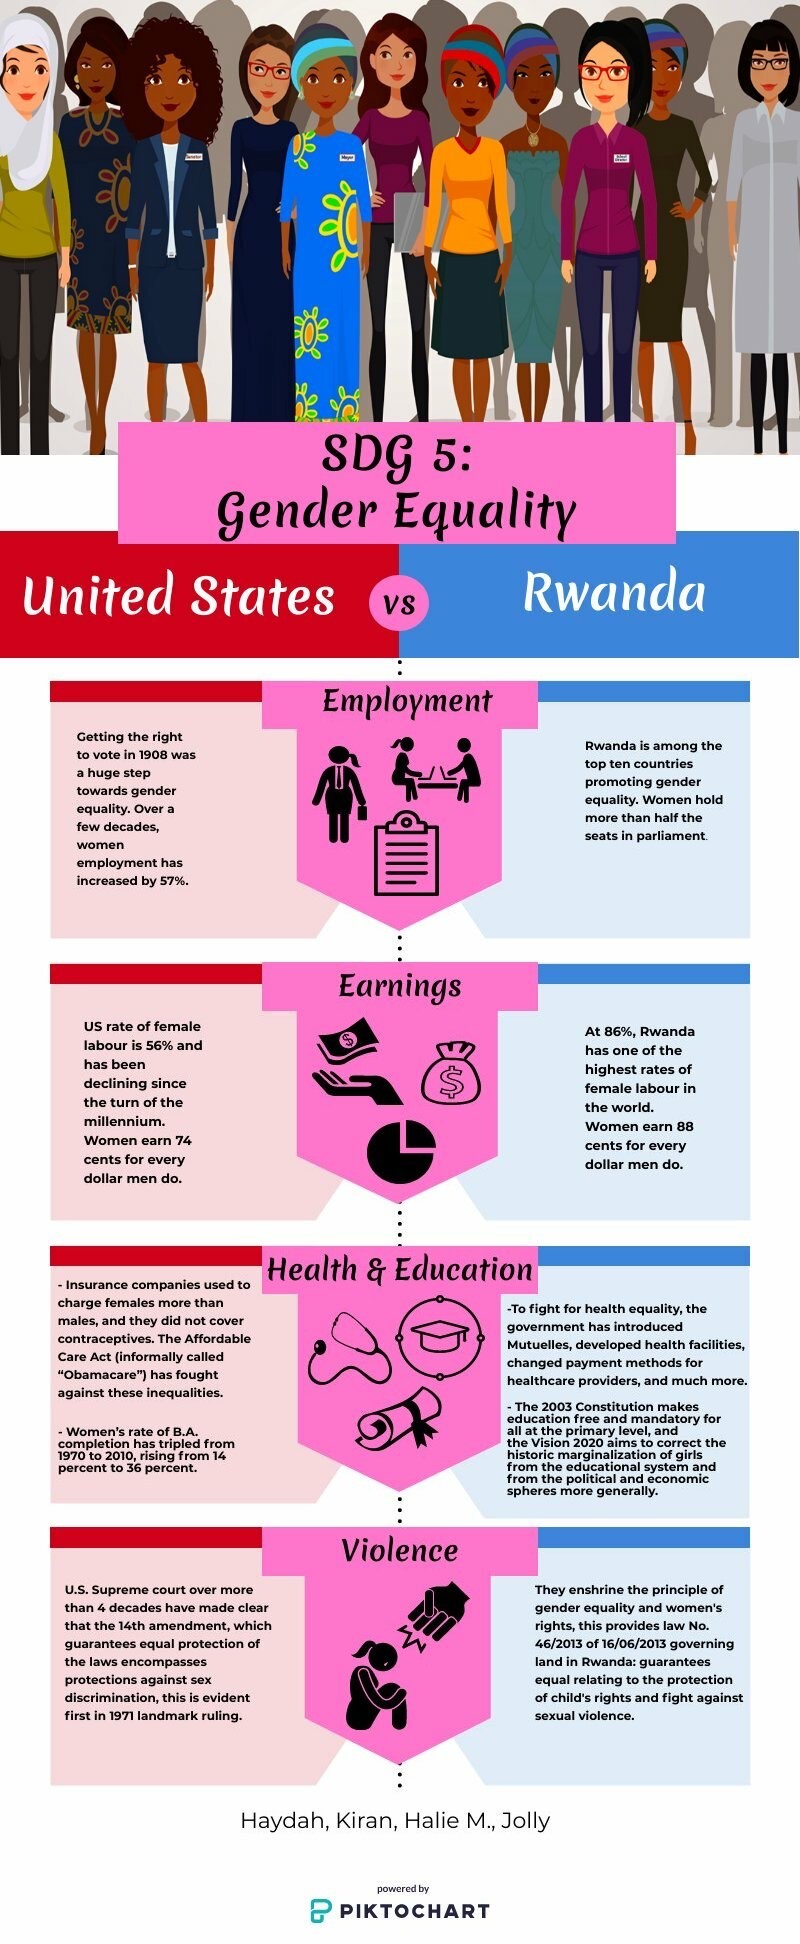 Poster comparing gender equality in the US and Rwanda across employment, earnings, health & education, and violence